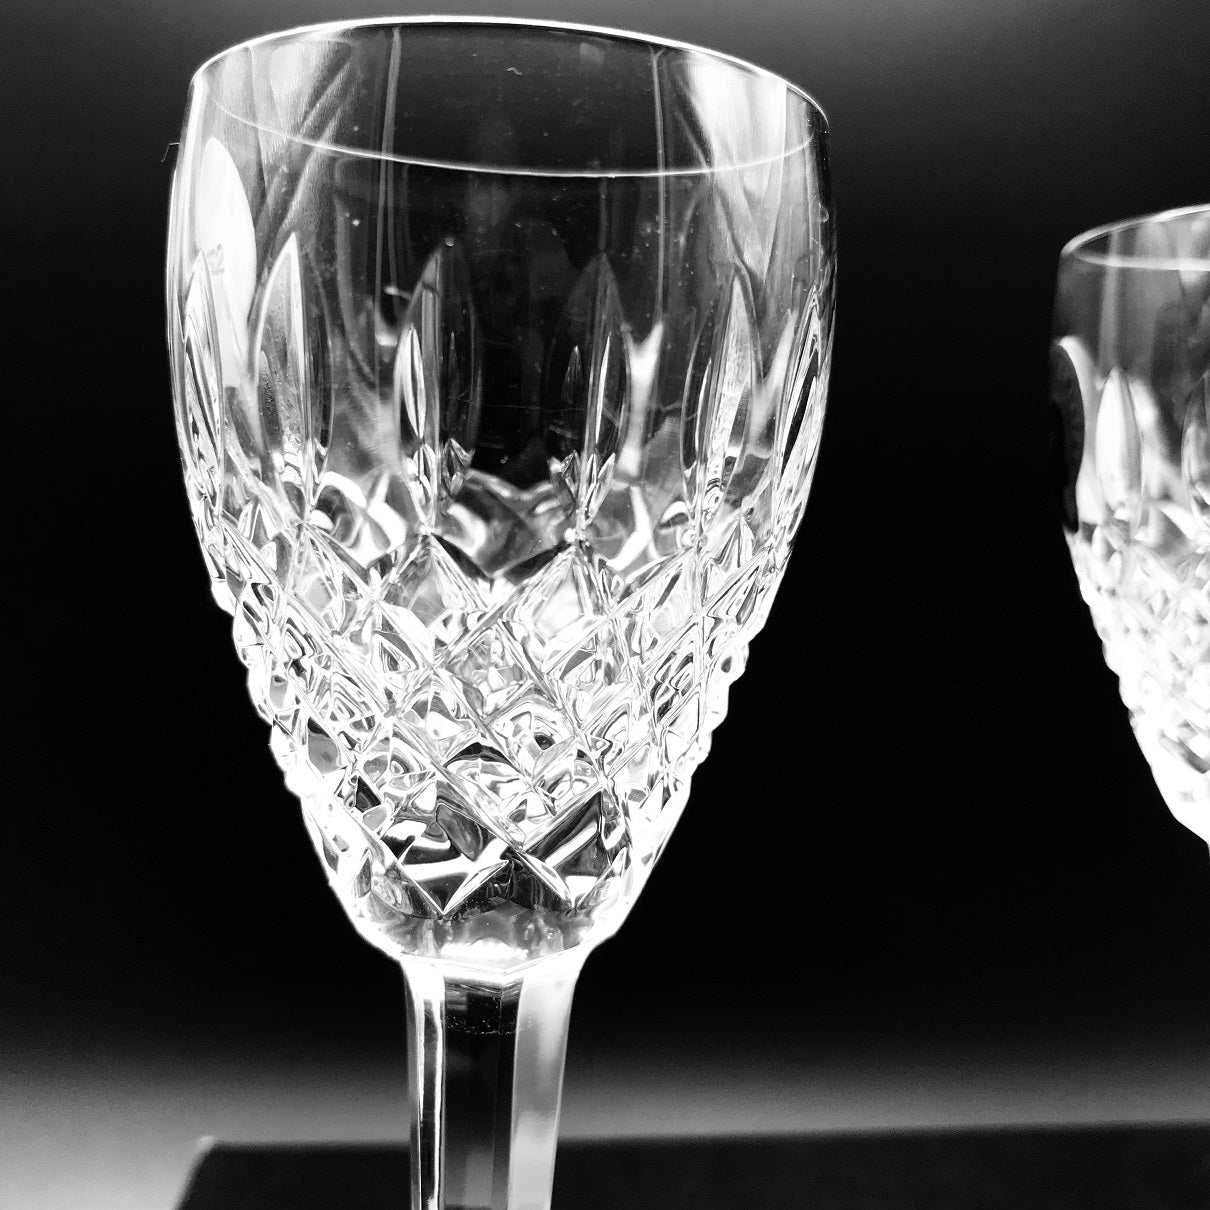 Castlemaine Sherry Pair Waterford Crystal